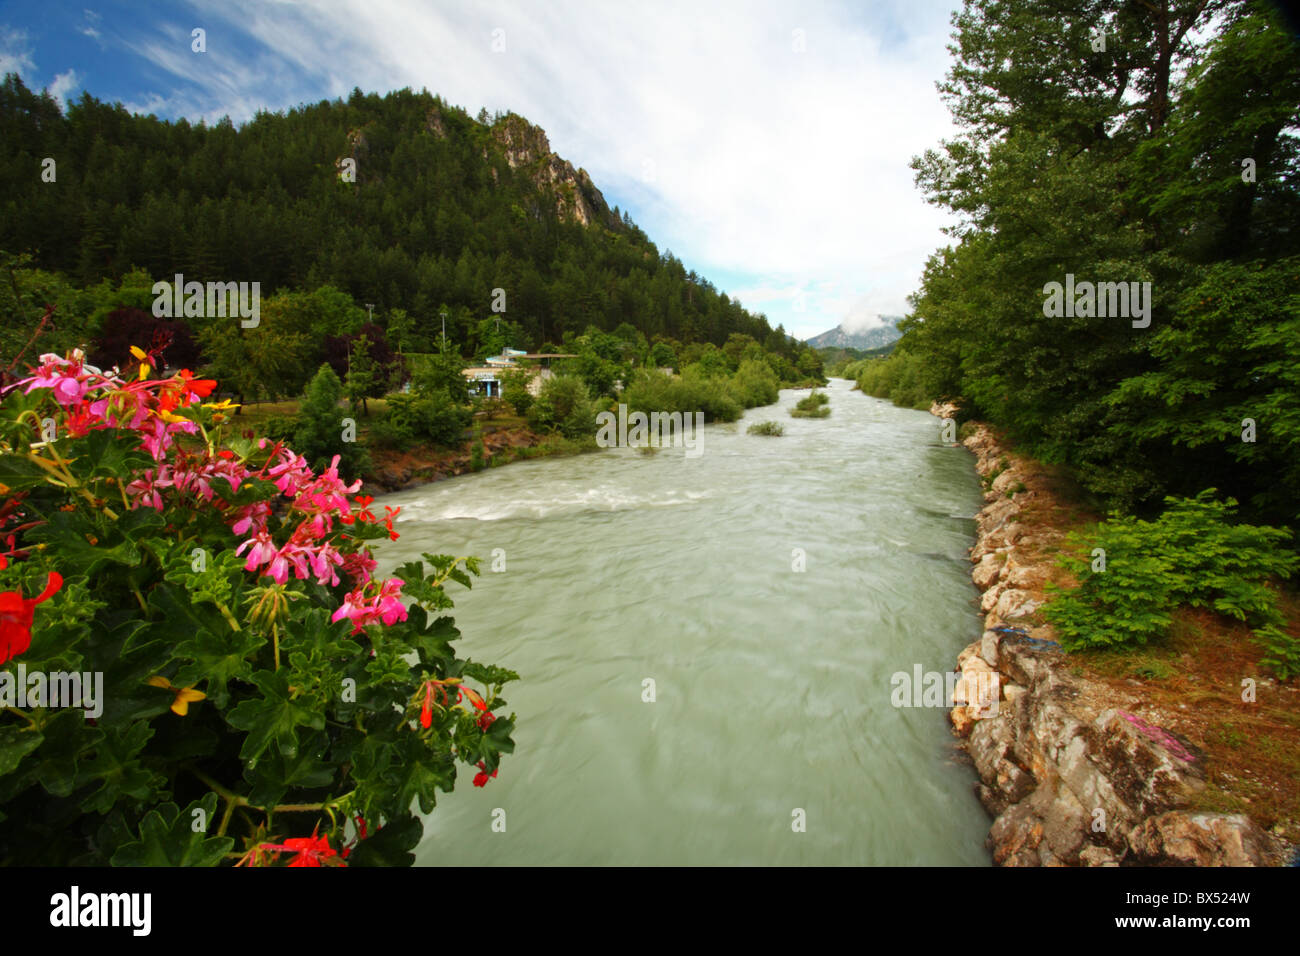 Verdon river in flood in the French town of Castellane, Alpes-de-Haute-Provence, France, Europe. Stock Photo